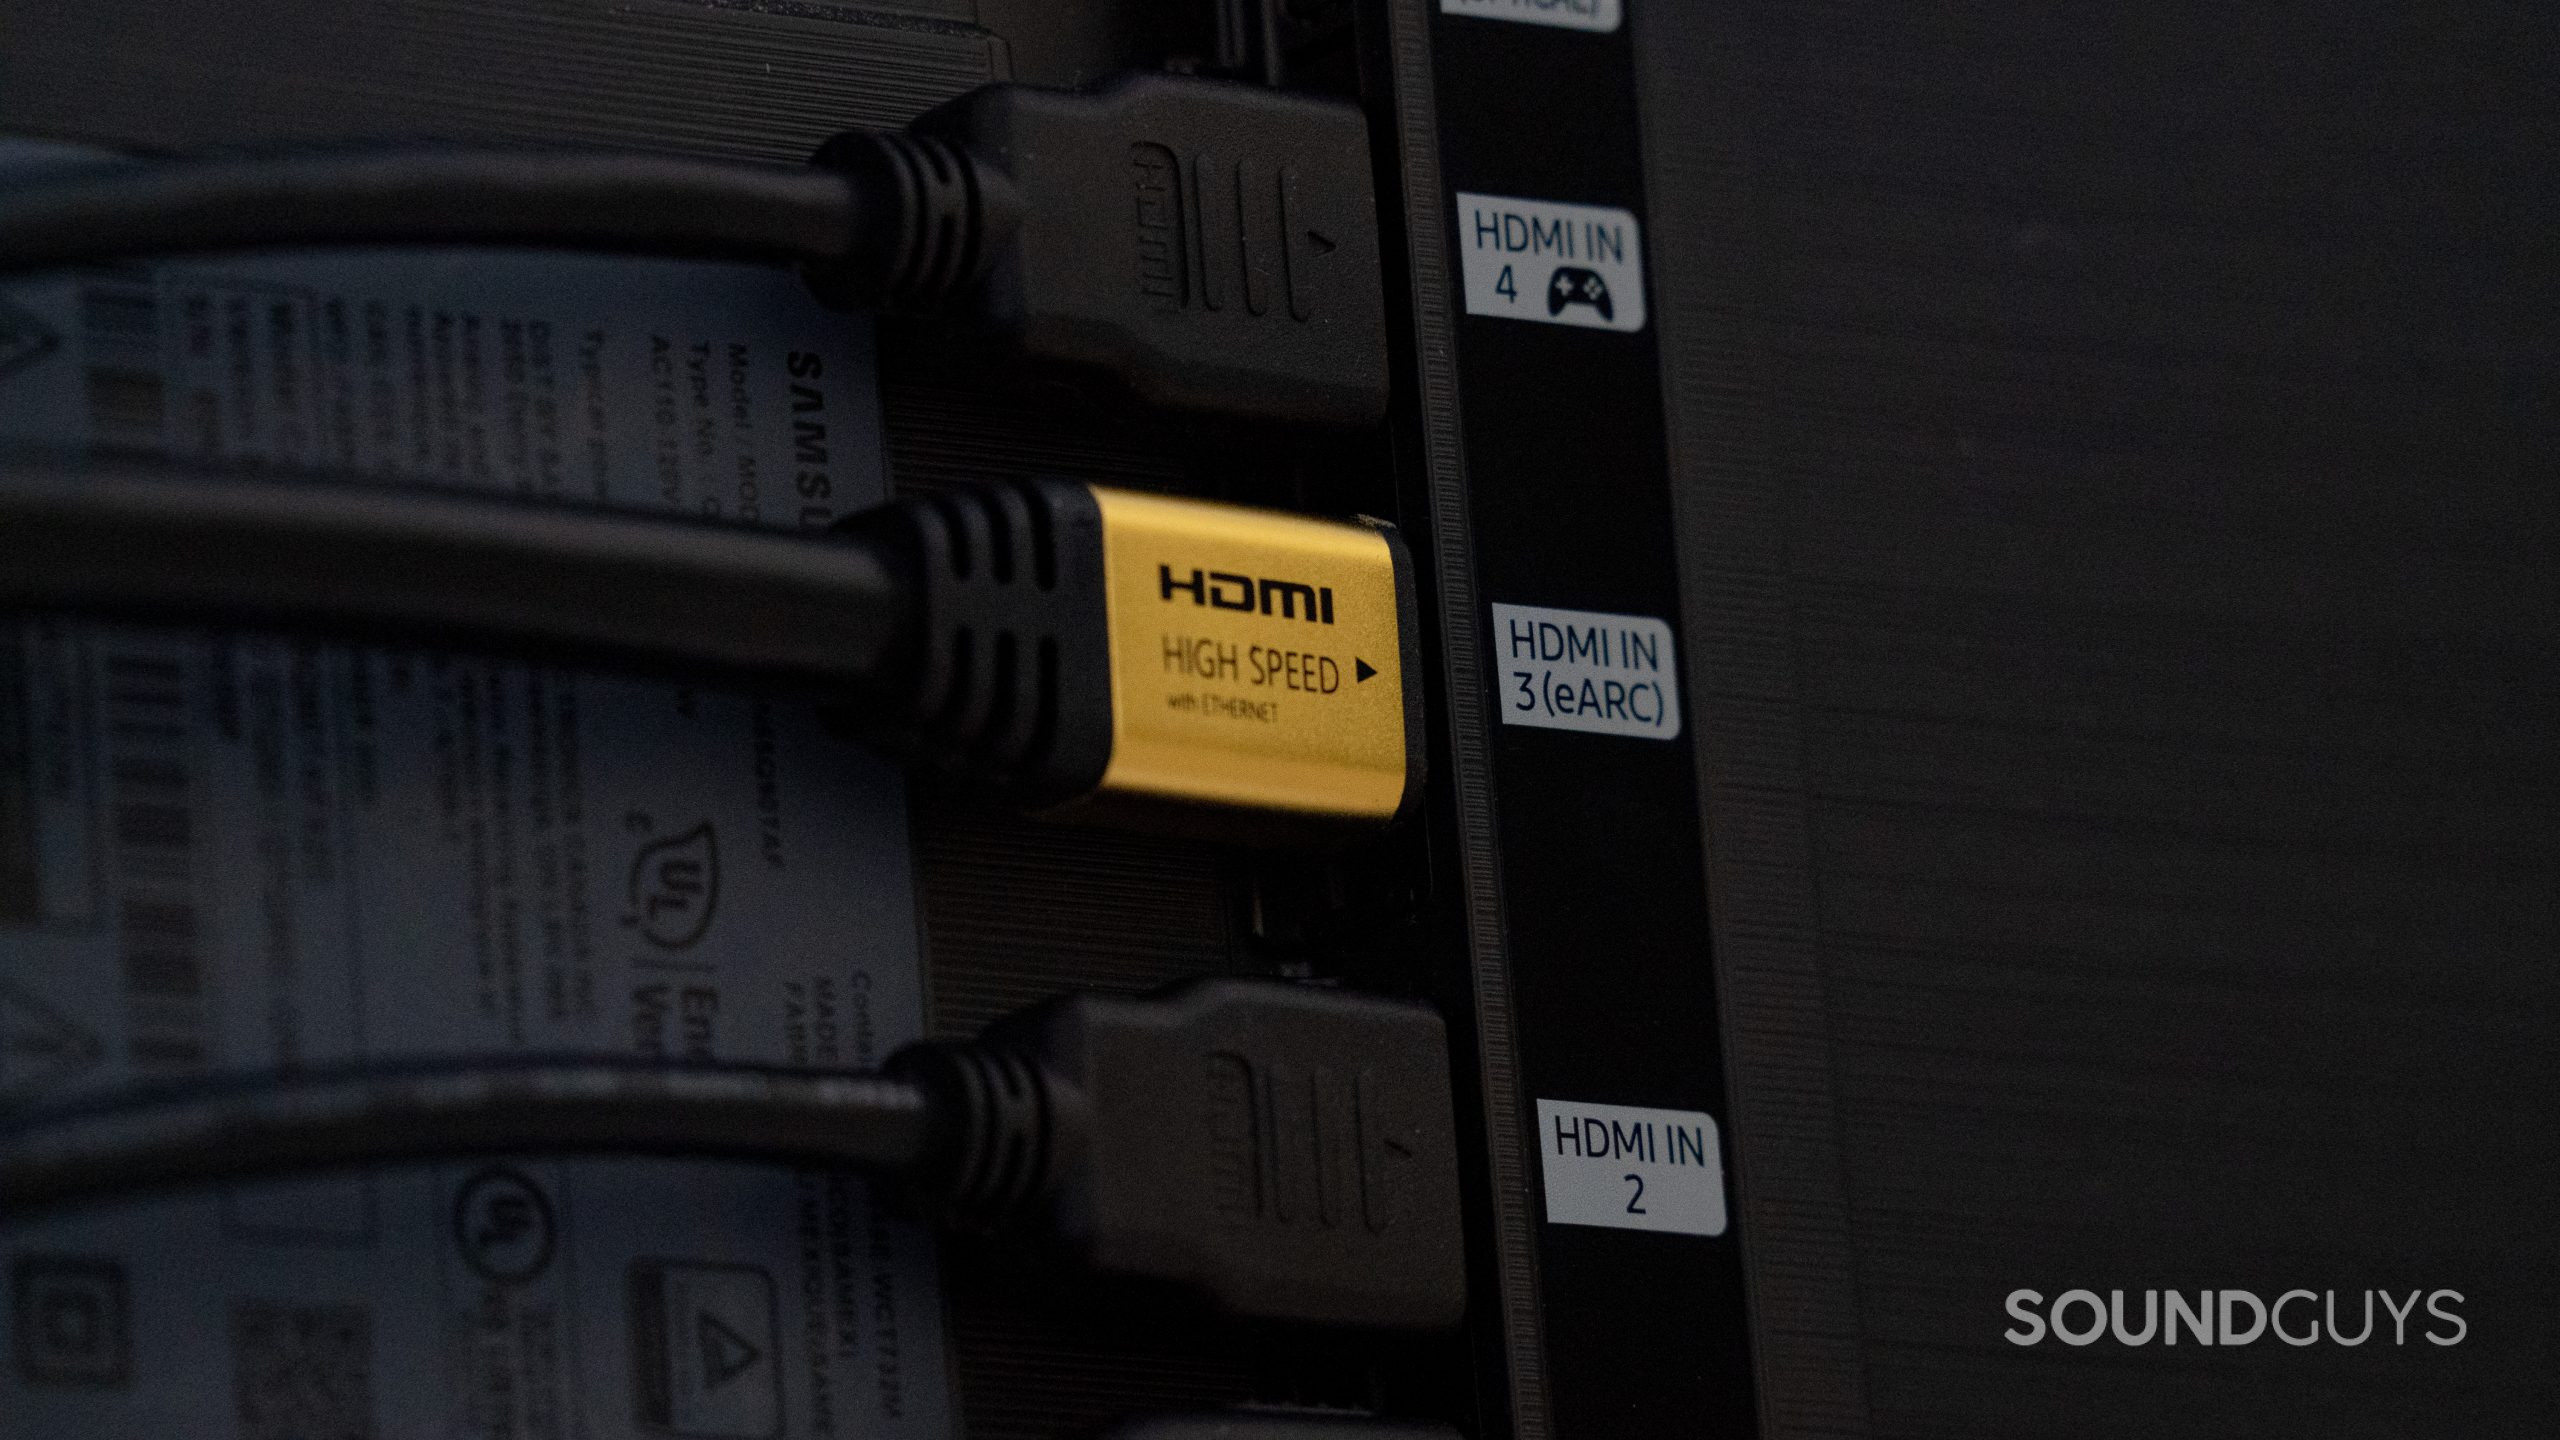 A row of HDMI input sockets on the back of a TV, one of which is labelled HDMI eARC. A cable is plugged into each one.